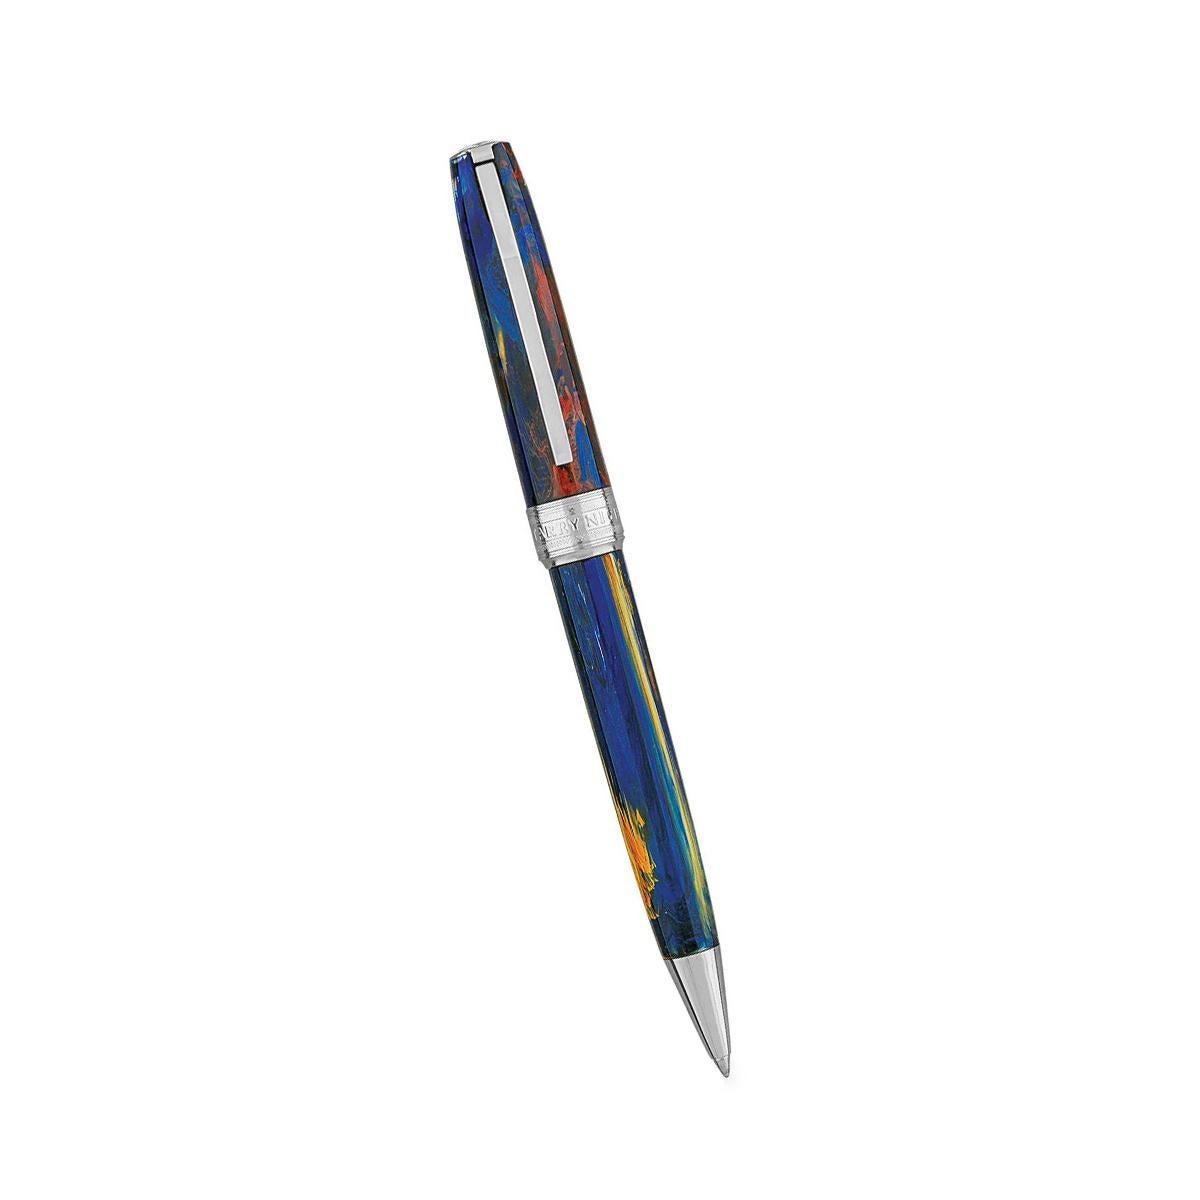 The perfect graduation gift! Made from natural resin uniquely mixed to represent palettes of oil paint, this Visconti Van Gogh series is inspired by the artist's color and technique. Each pen represents a specific Van Gogh painting. The pen utilizes